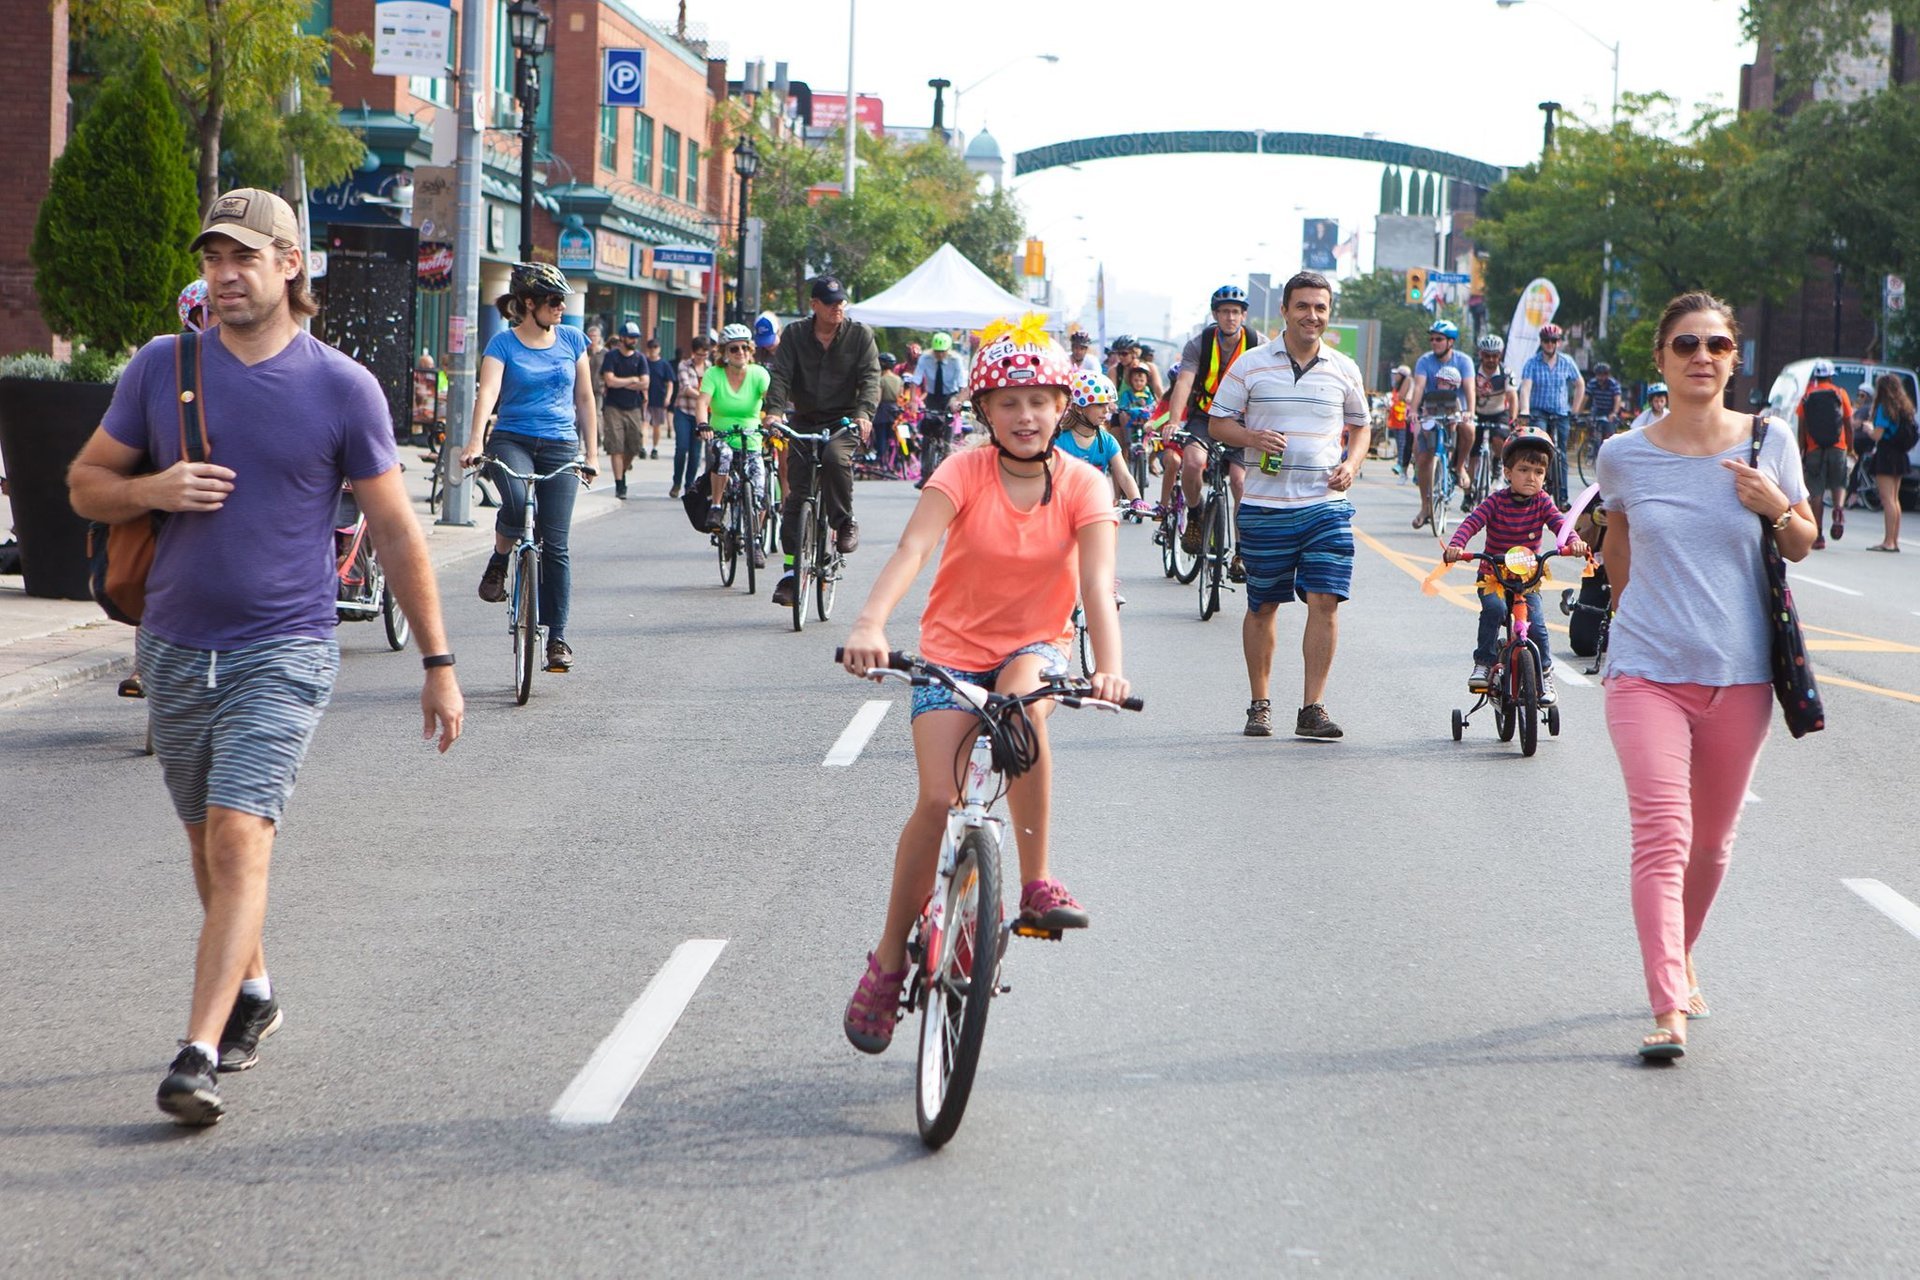 Open Streets TO